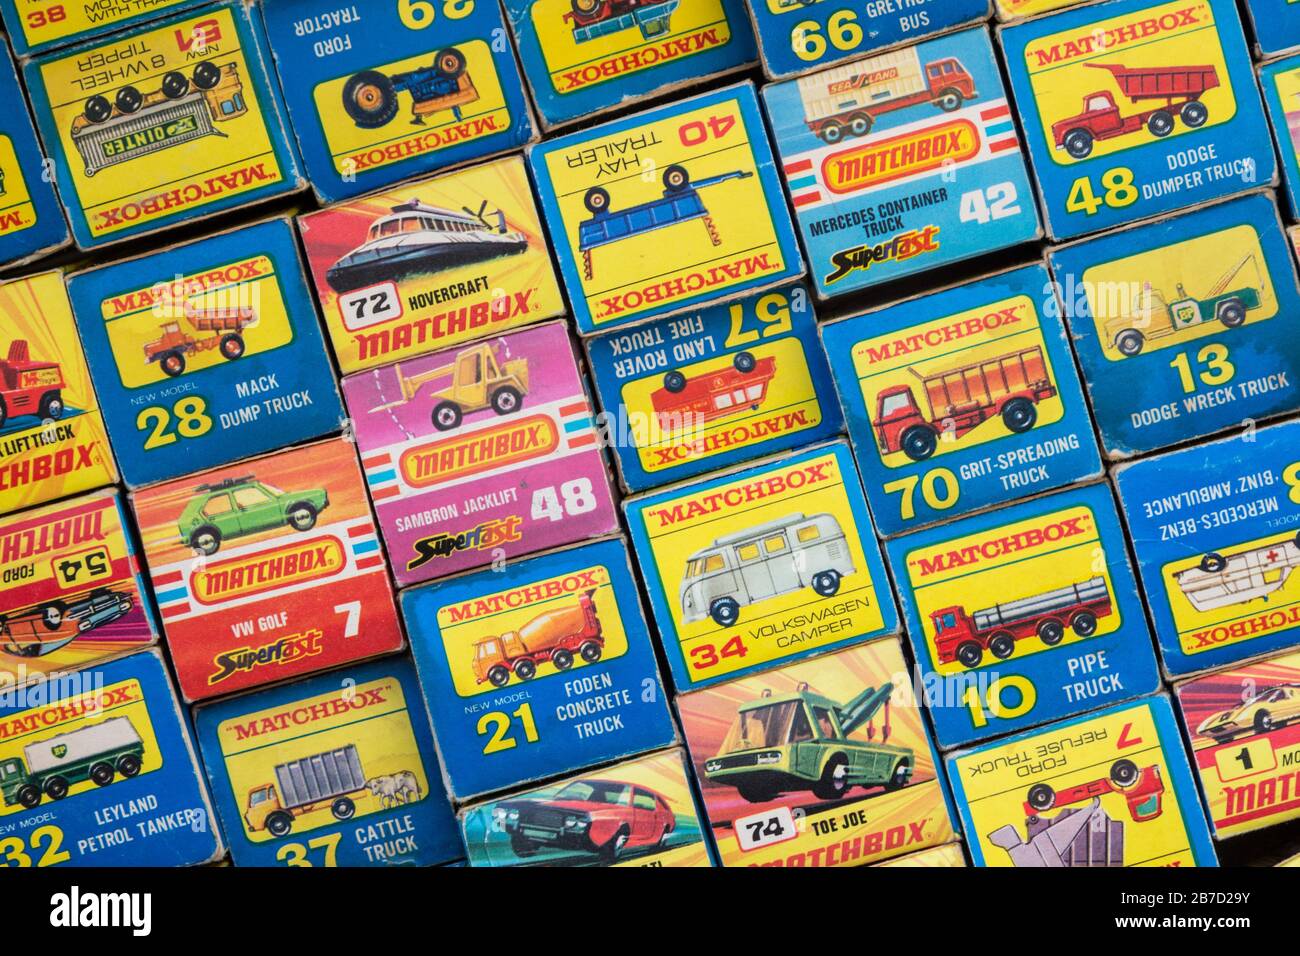 Pile group of Matchbox toy model car boxes side by side Stock Photo